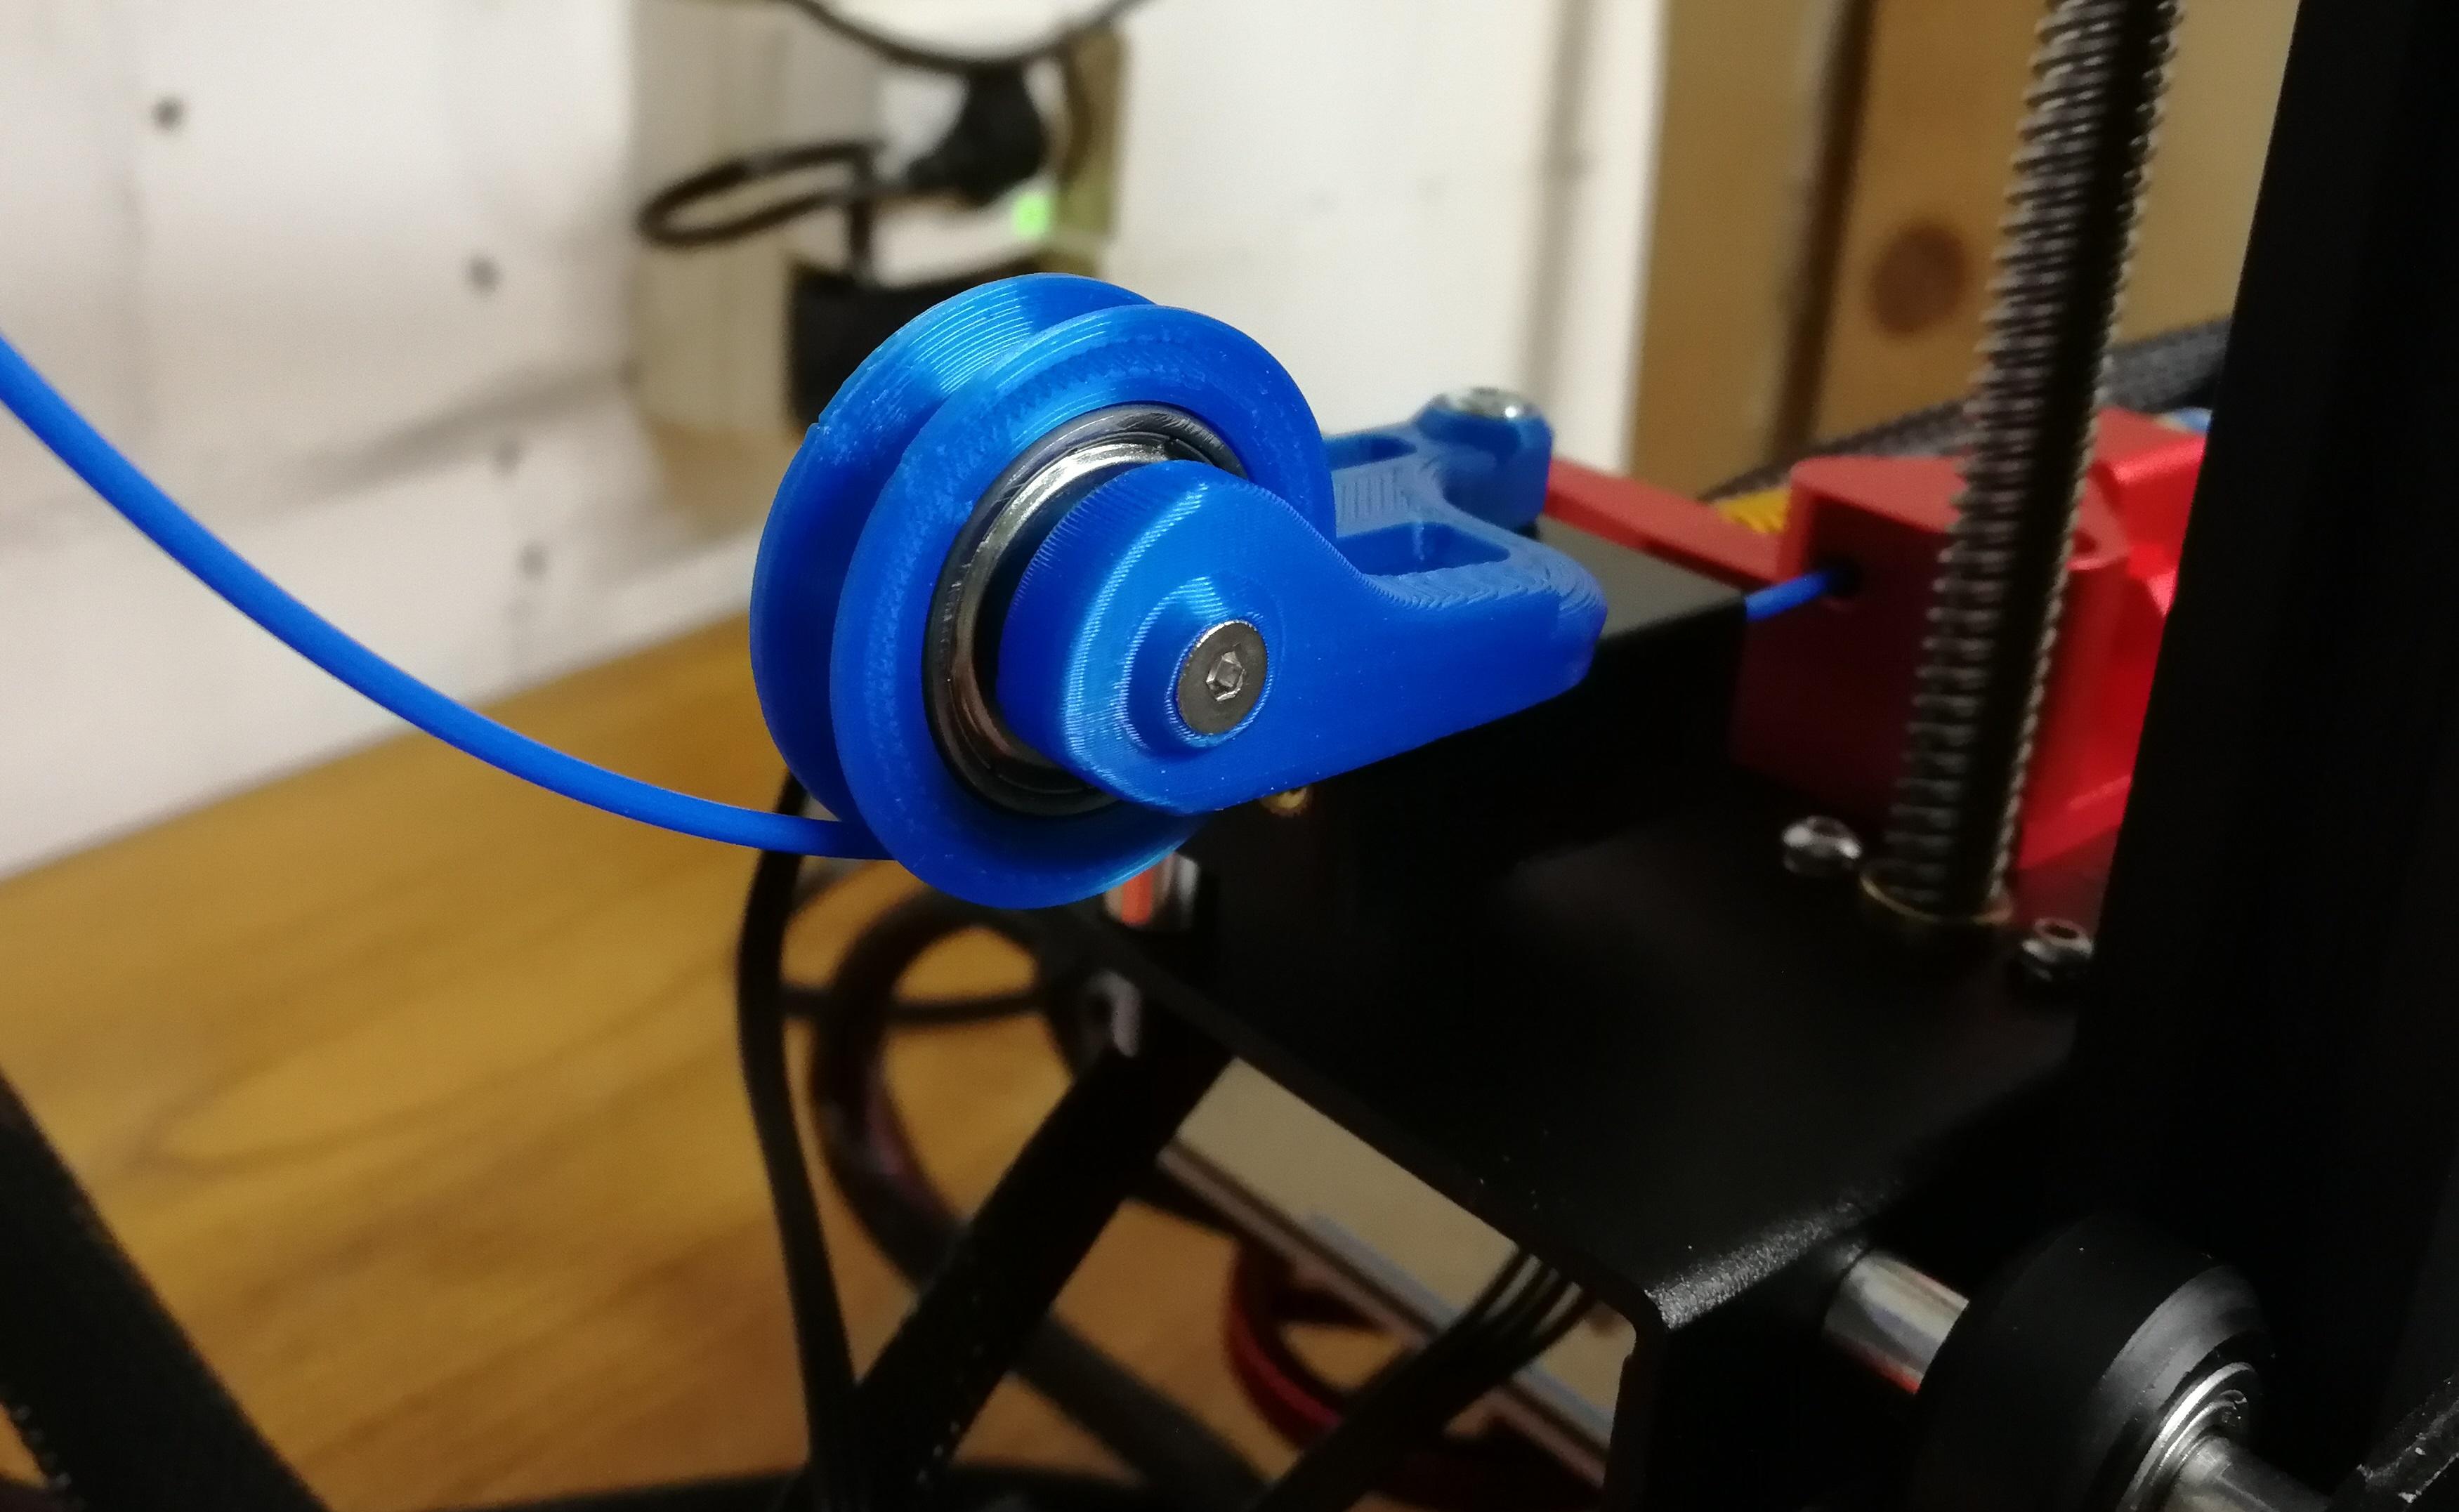 Filament Guide Roller for Elegoo Neptune 2 - Fits also perfect on an Elegoo Neptune 2S! Thanks for this nice add on! - 3d model